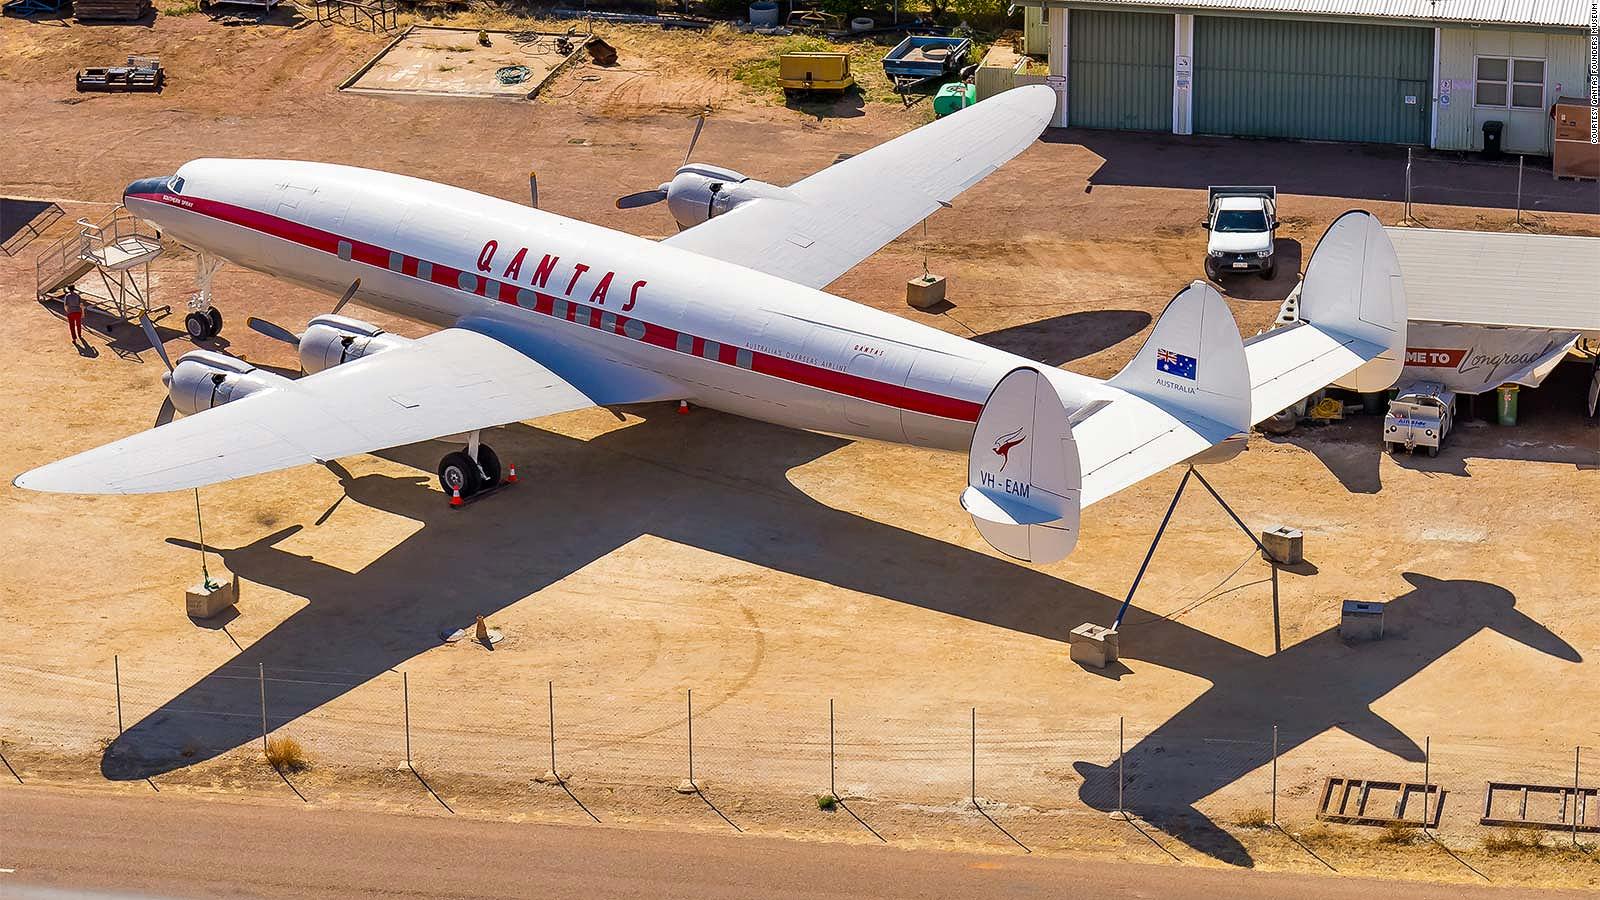 Qantas Super Constellation Airliner From 1950s Is Restored